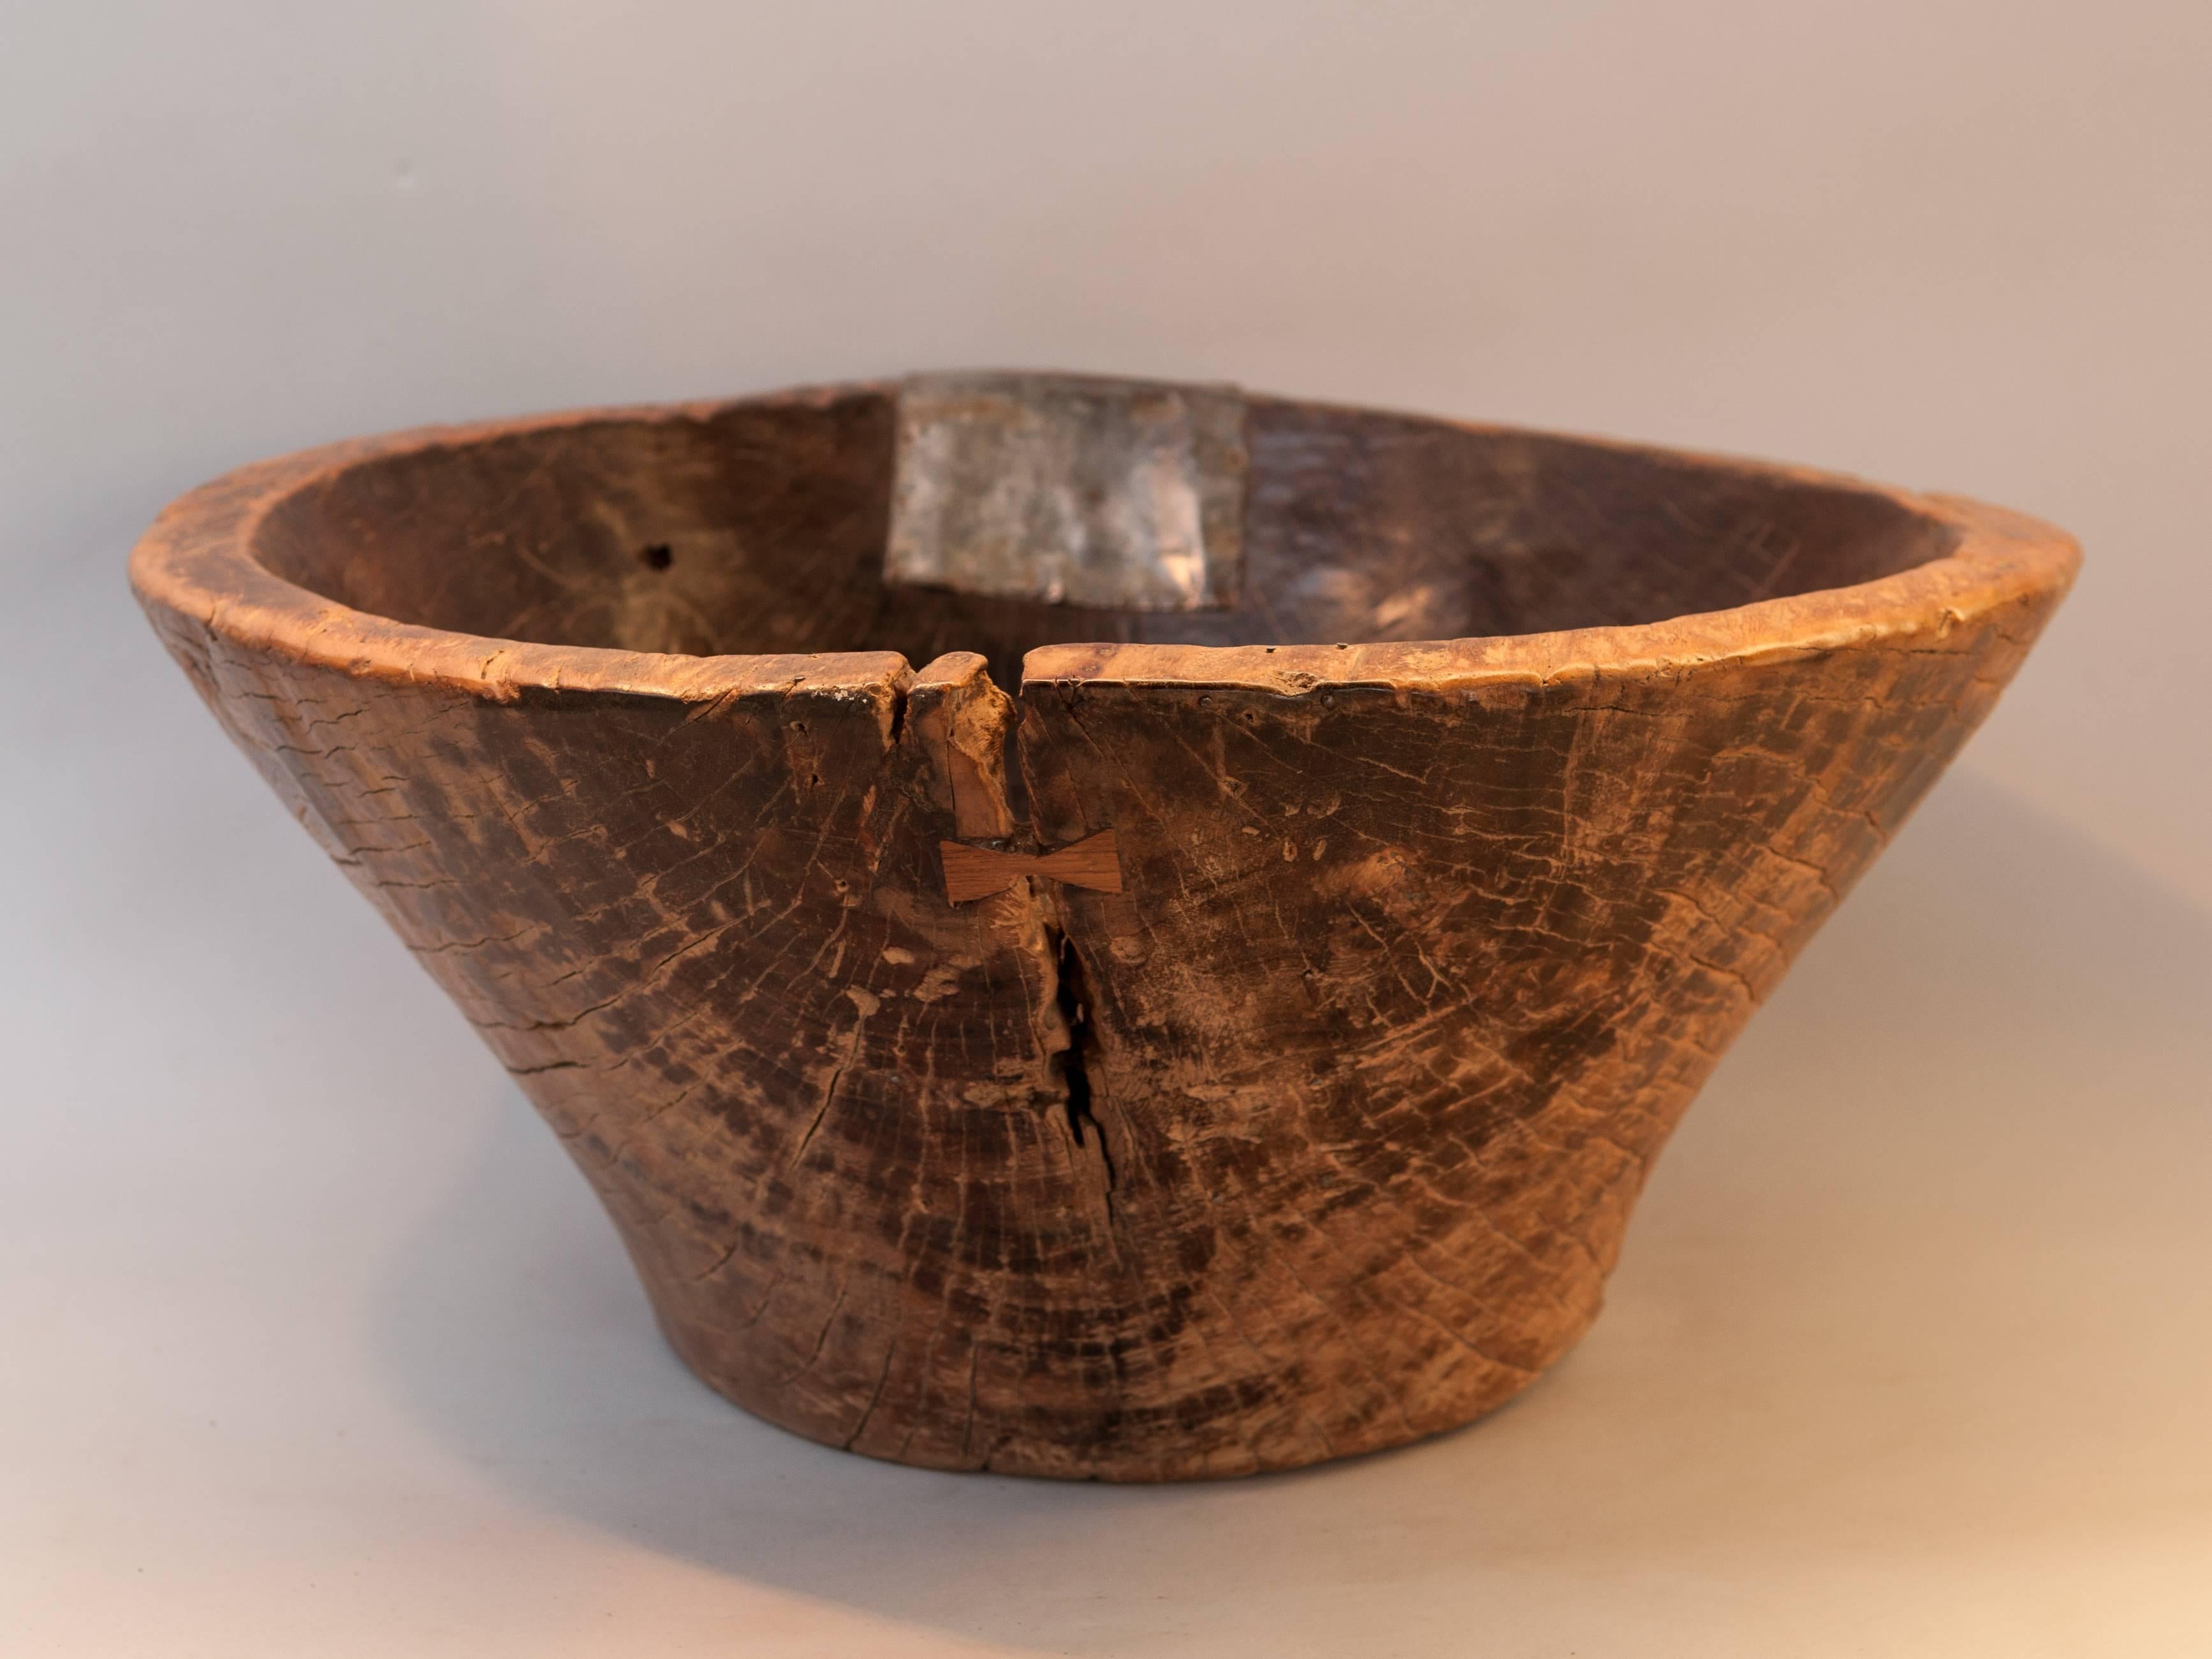 Large hand hewn wooden bowl. Cirebon, Java, mid-20th century. Jackfruit wood.
This rustic wood bowl was fashioned by hand from a single piece of Jackfruit wood and comes from the Cirebon area of northern Java. It would have been used to offer foot